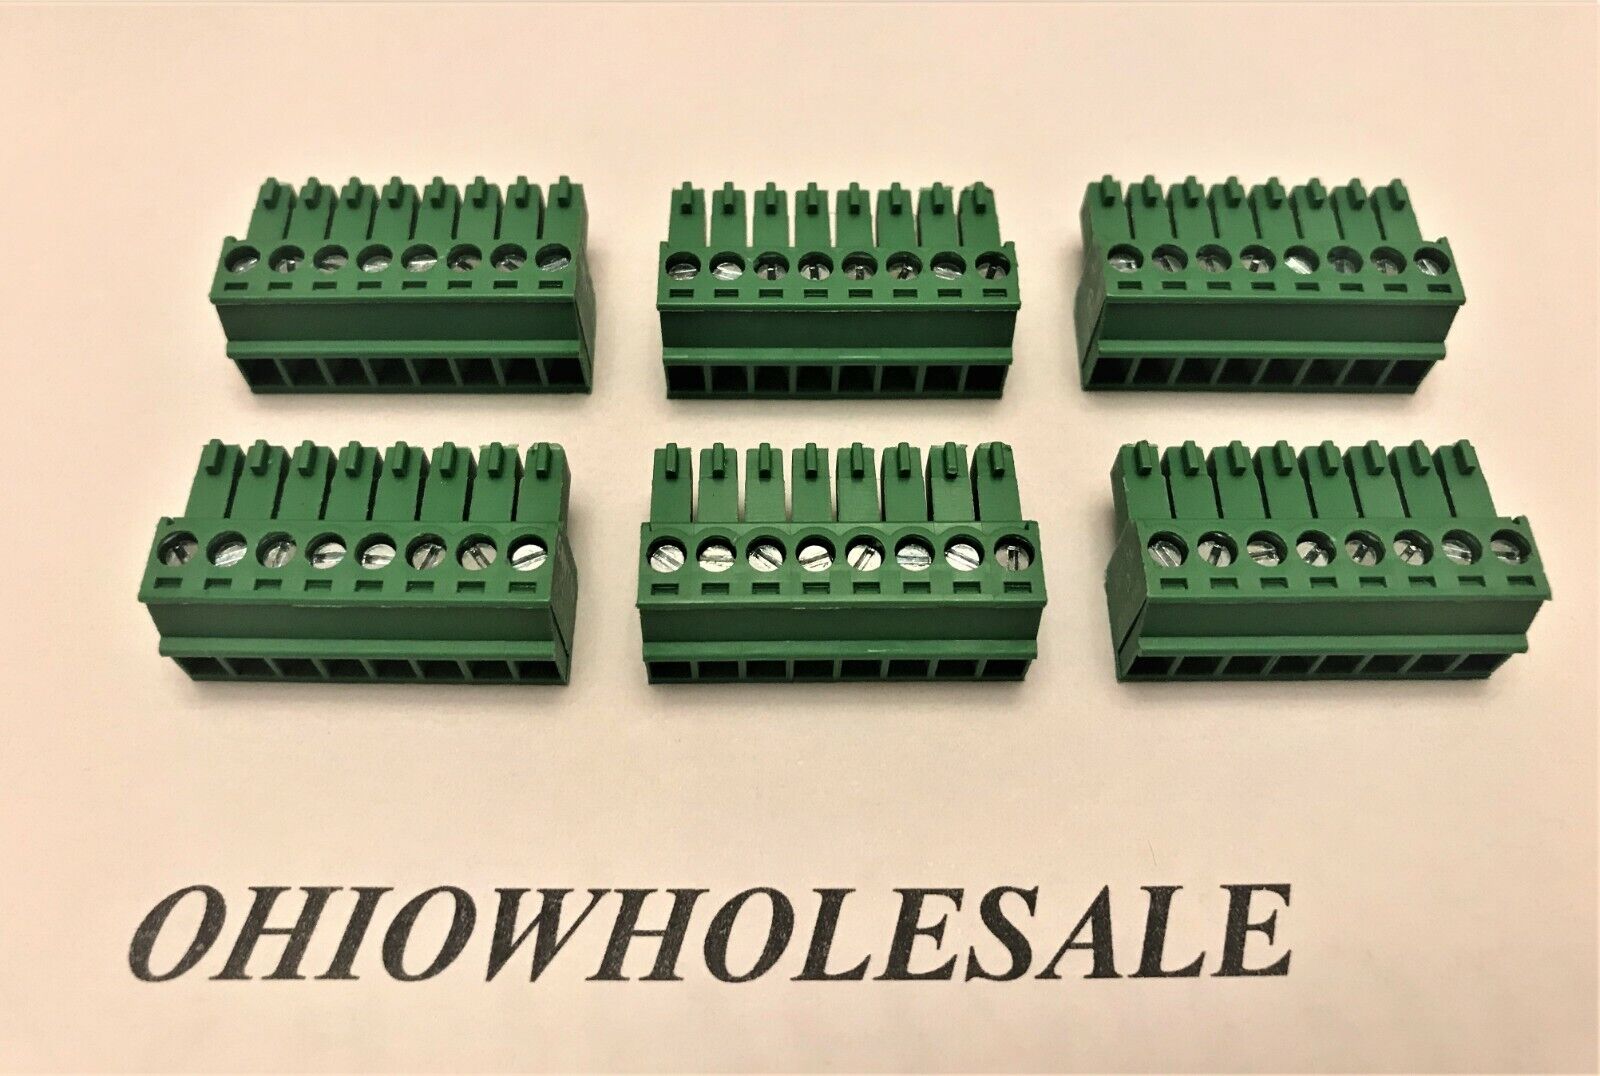  8 pin 3.5mm Phoenix Connector Screw Terminal Block Lot of 6 UL LISTED